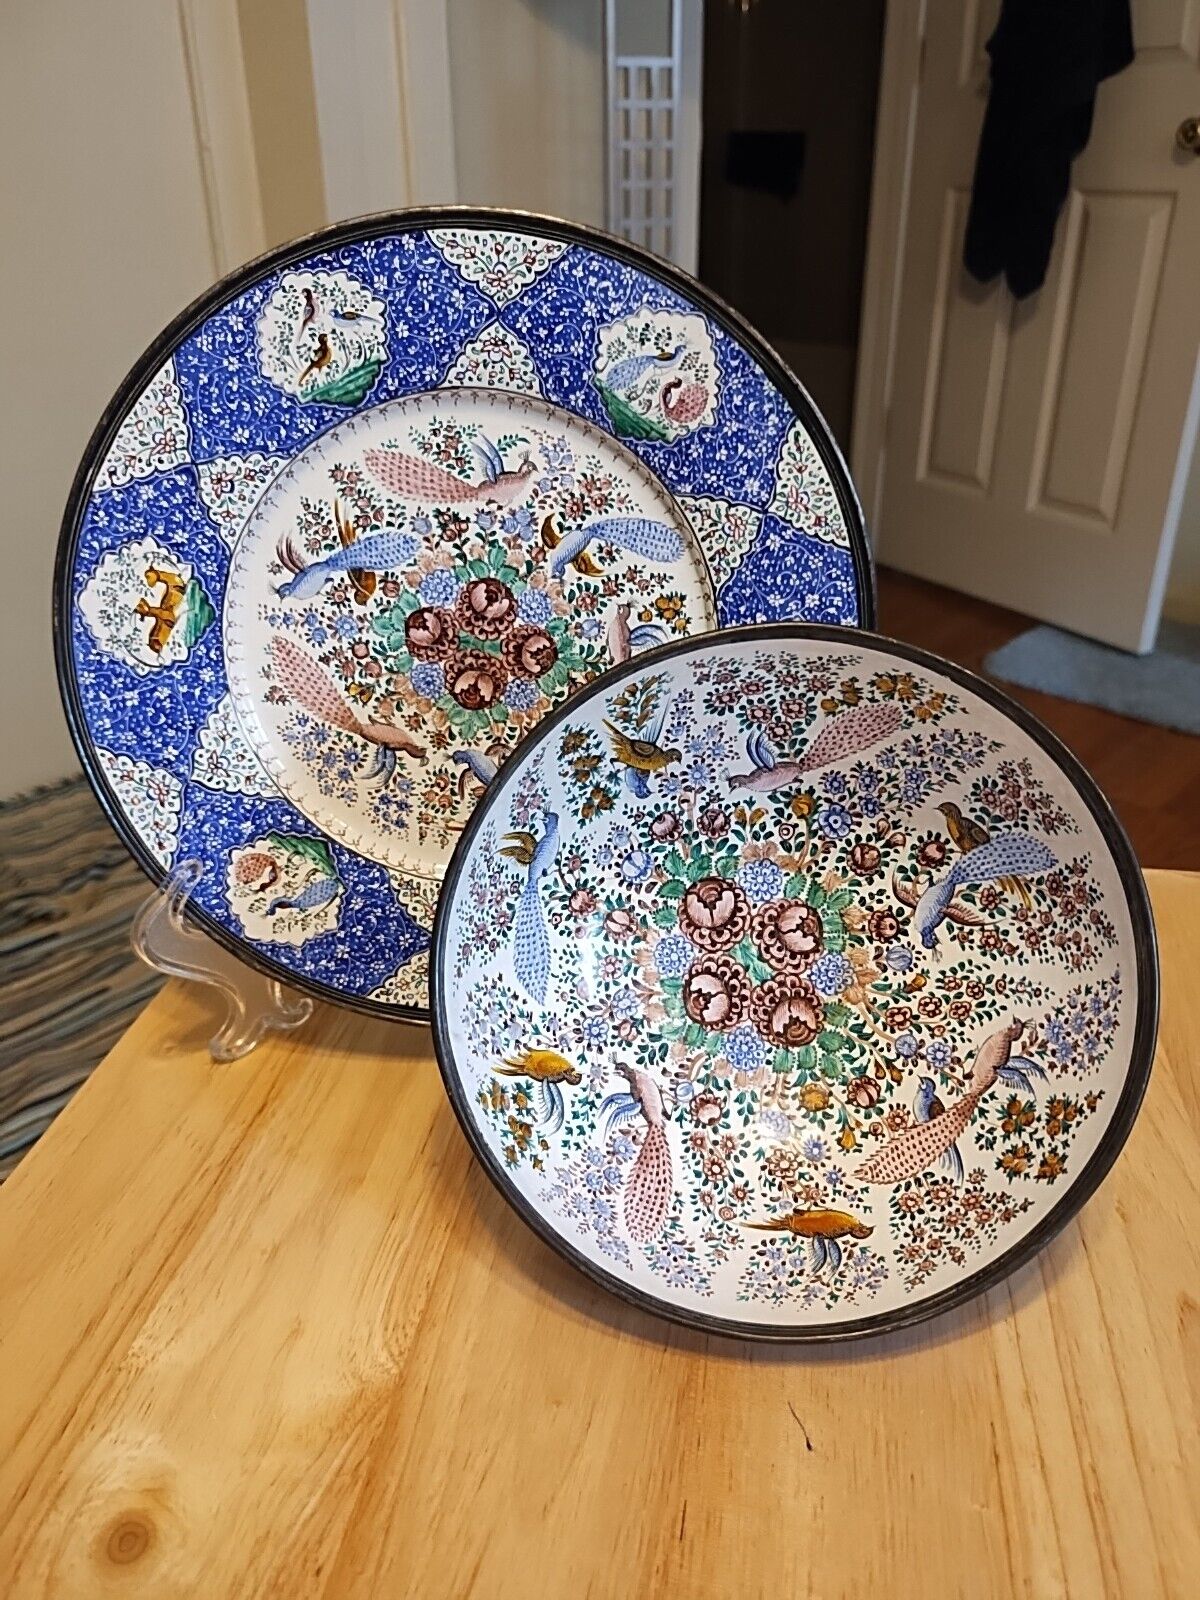 Lovely Antique Persian Hand Painted Enameled Copper Bowl and Plate